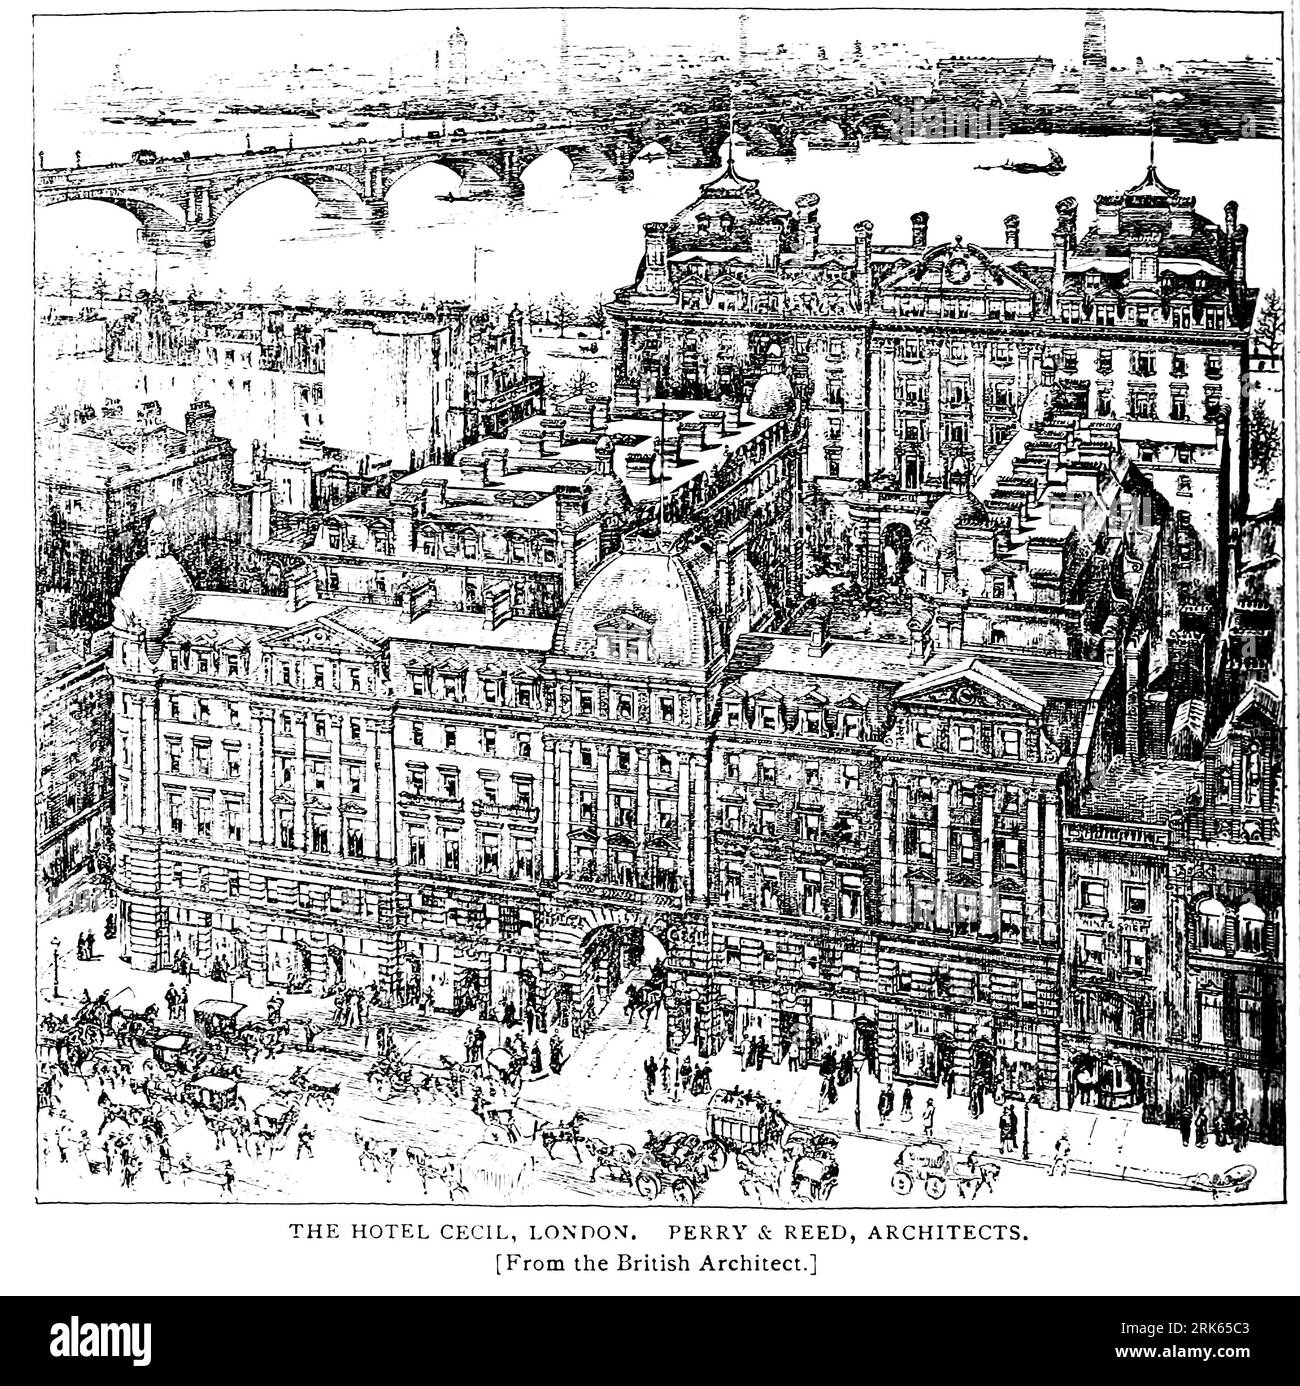 THE HOTEL CECIL, LONDON. PERRY & REED, ARCHITECTS. from the Article Architectural Review from The Engineering Magazine DEVOTED TO INDUSTRIAL PROGRESS Volume XI October 1896 NEW YORK The Engineering Magazine Co Stock Photo